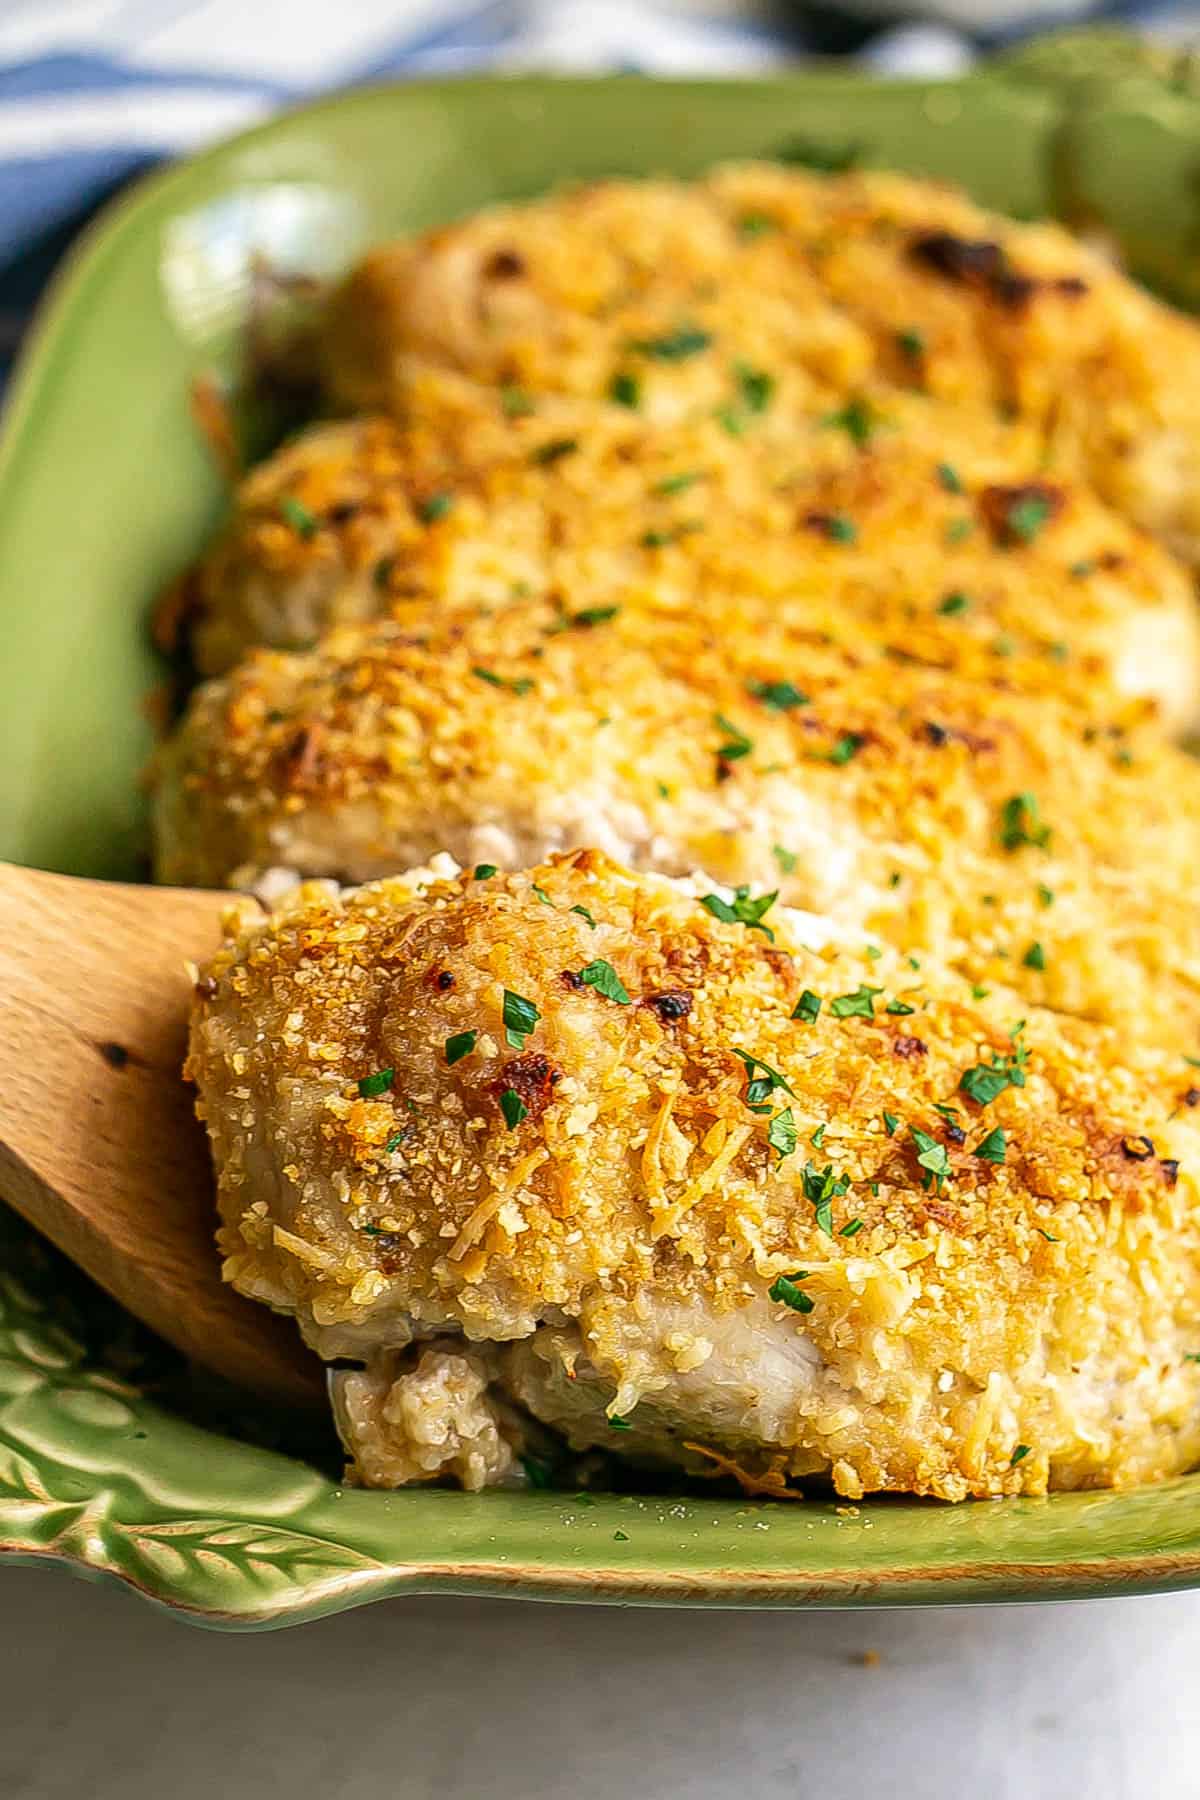 A wooden spatula lifting out a cheesy baked chicken breast from a green casserole dish.